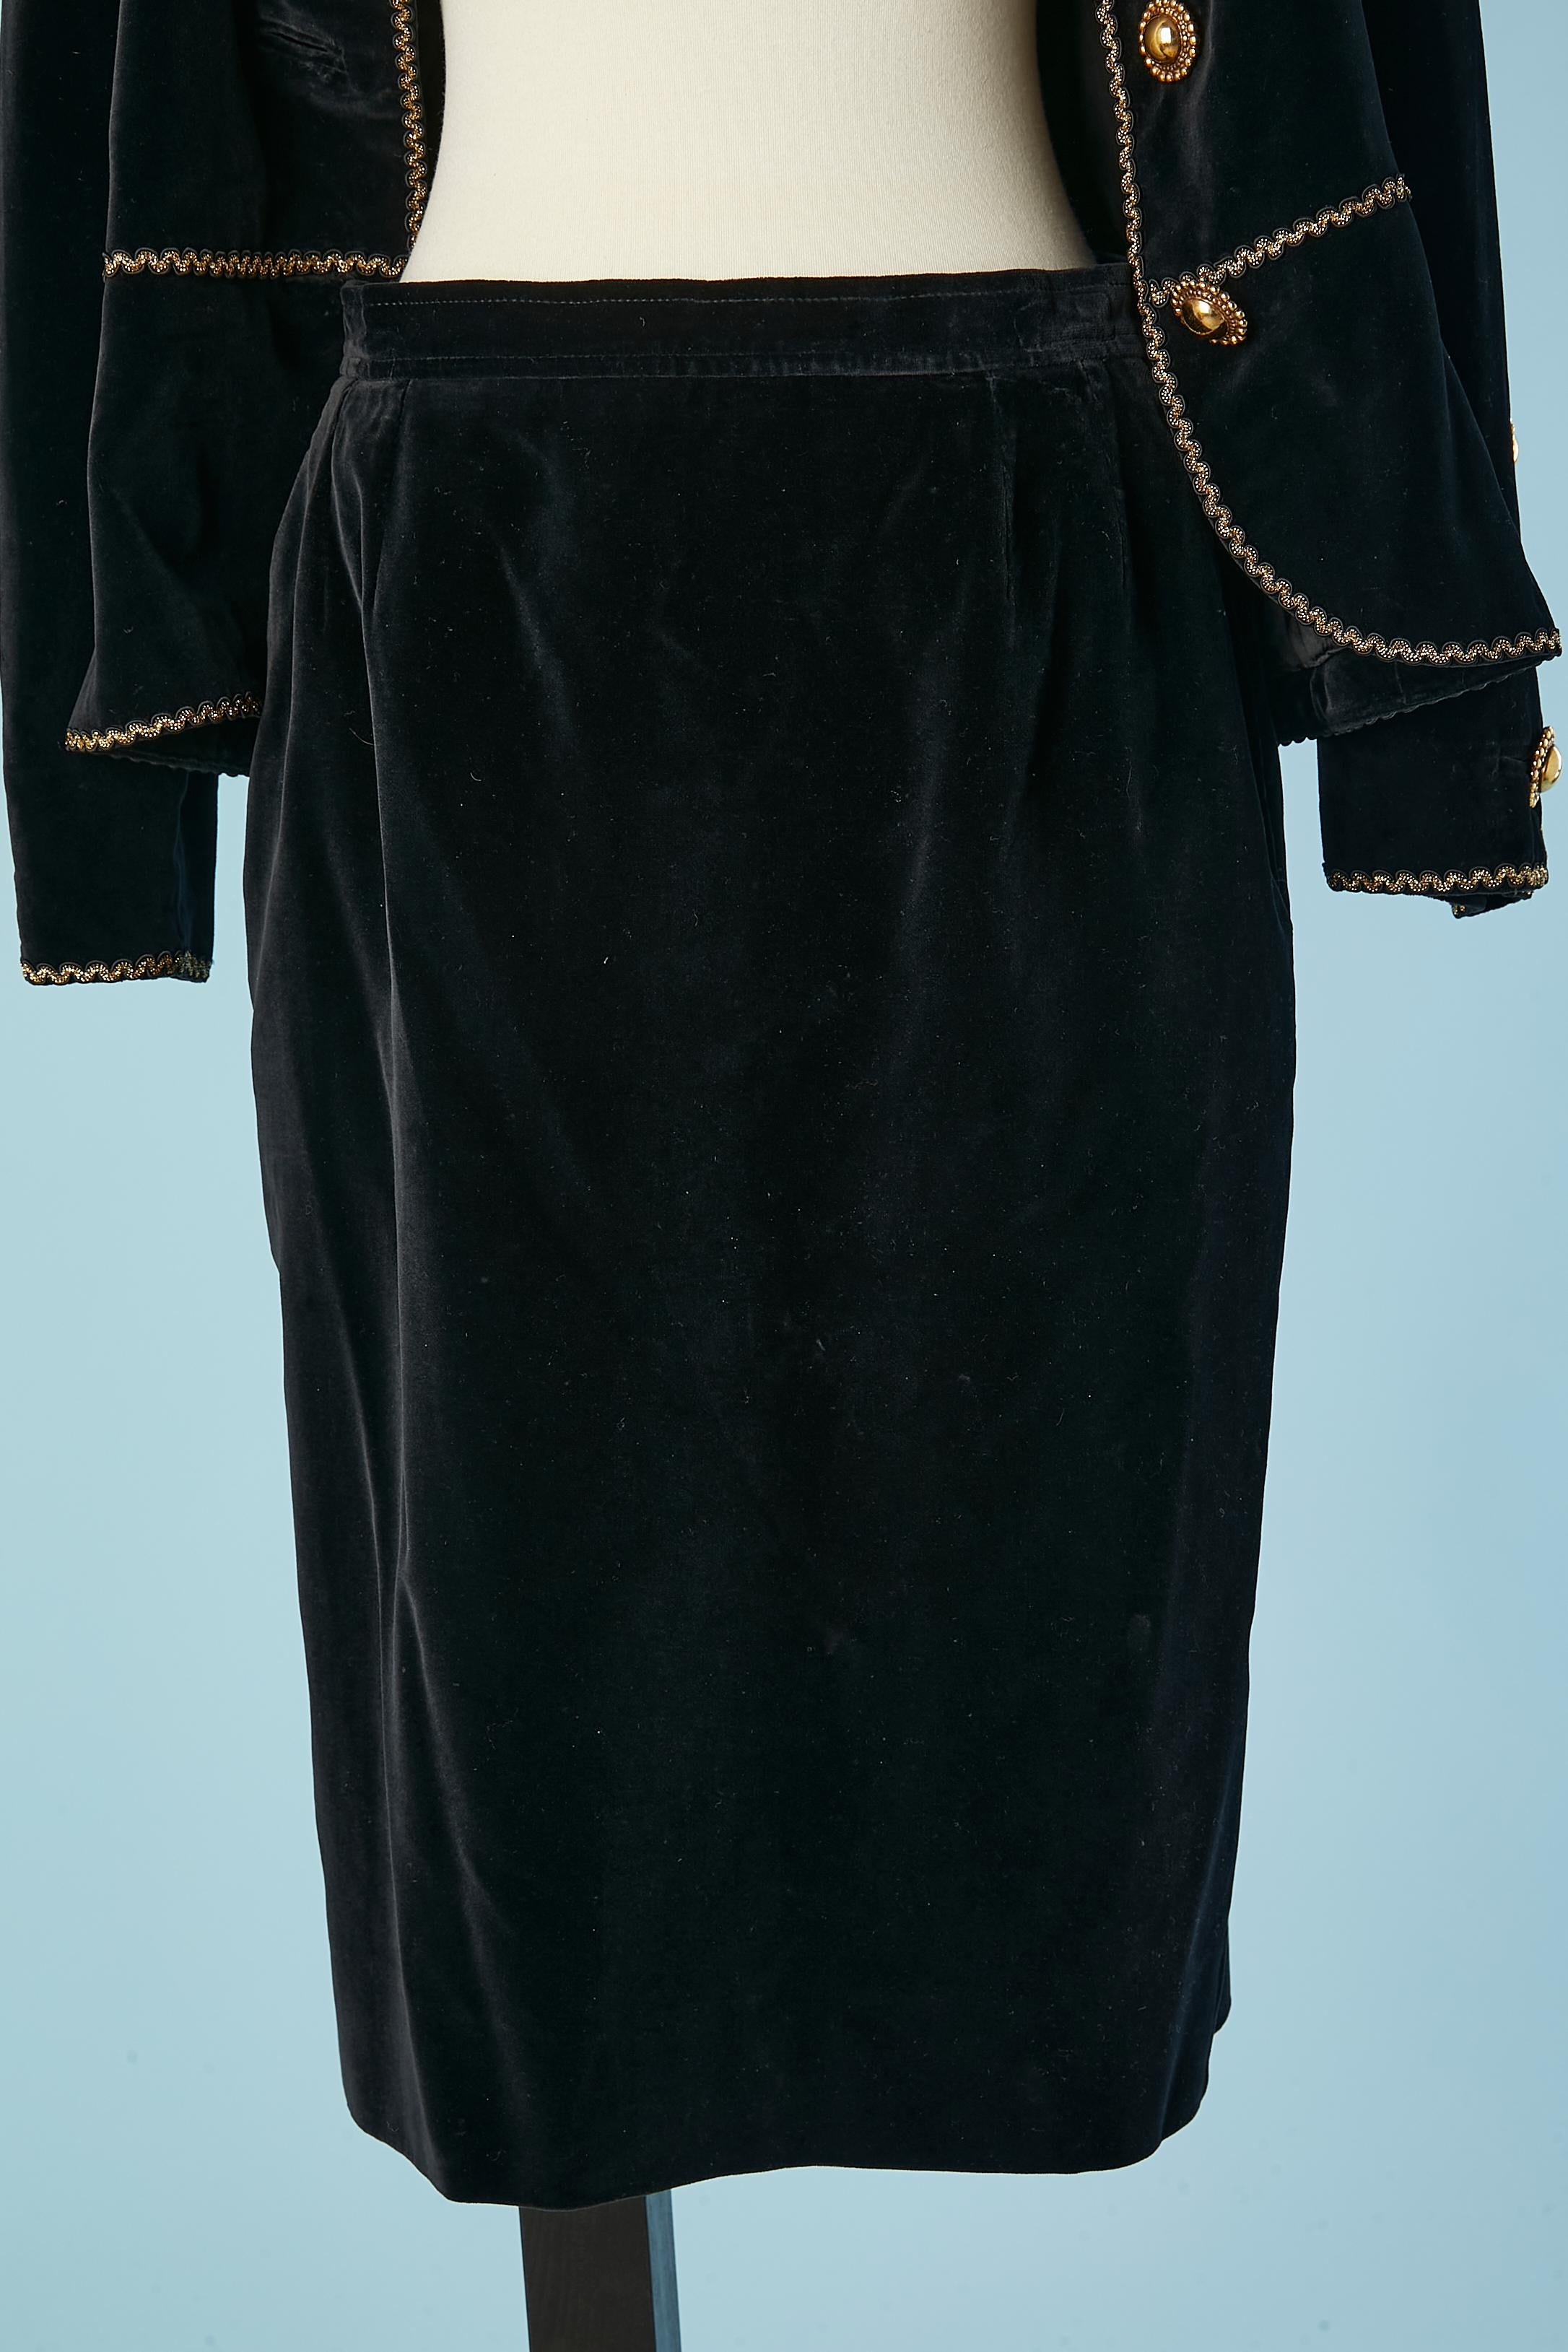 Black velvet cocktail skirt suit with gold metal buttons YSL Rive gauche 1980's  2